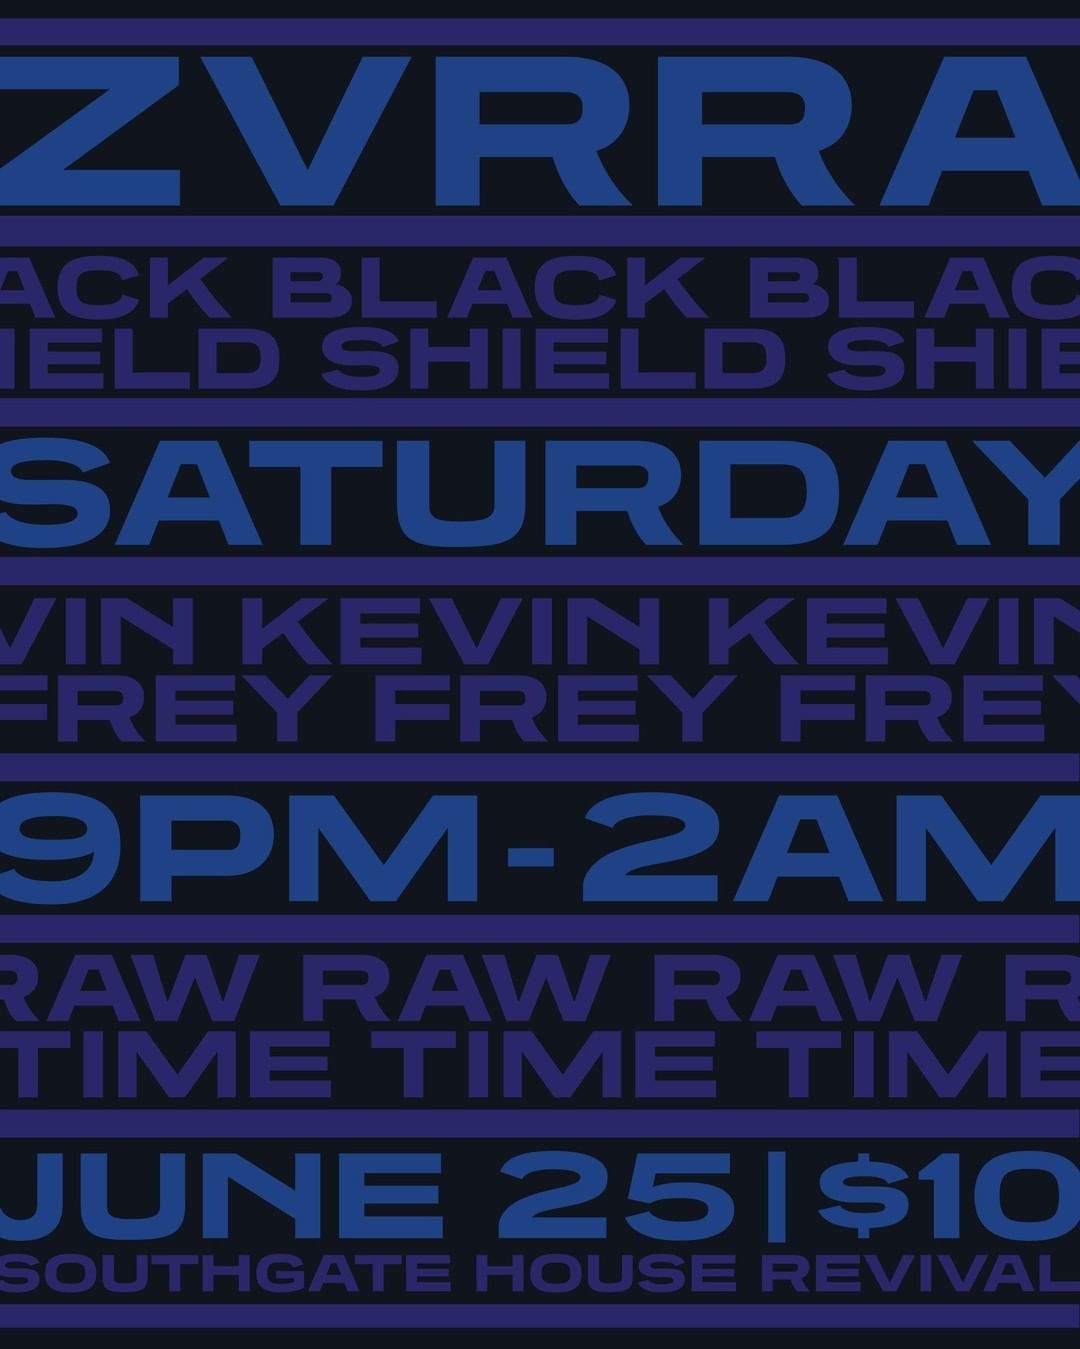 Flow x Whited Sepulchre Records present Zvrra with RAW TIME, Kevin Frey and Black Shield - フライヤー表